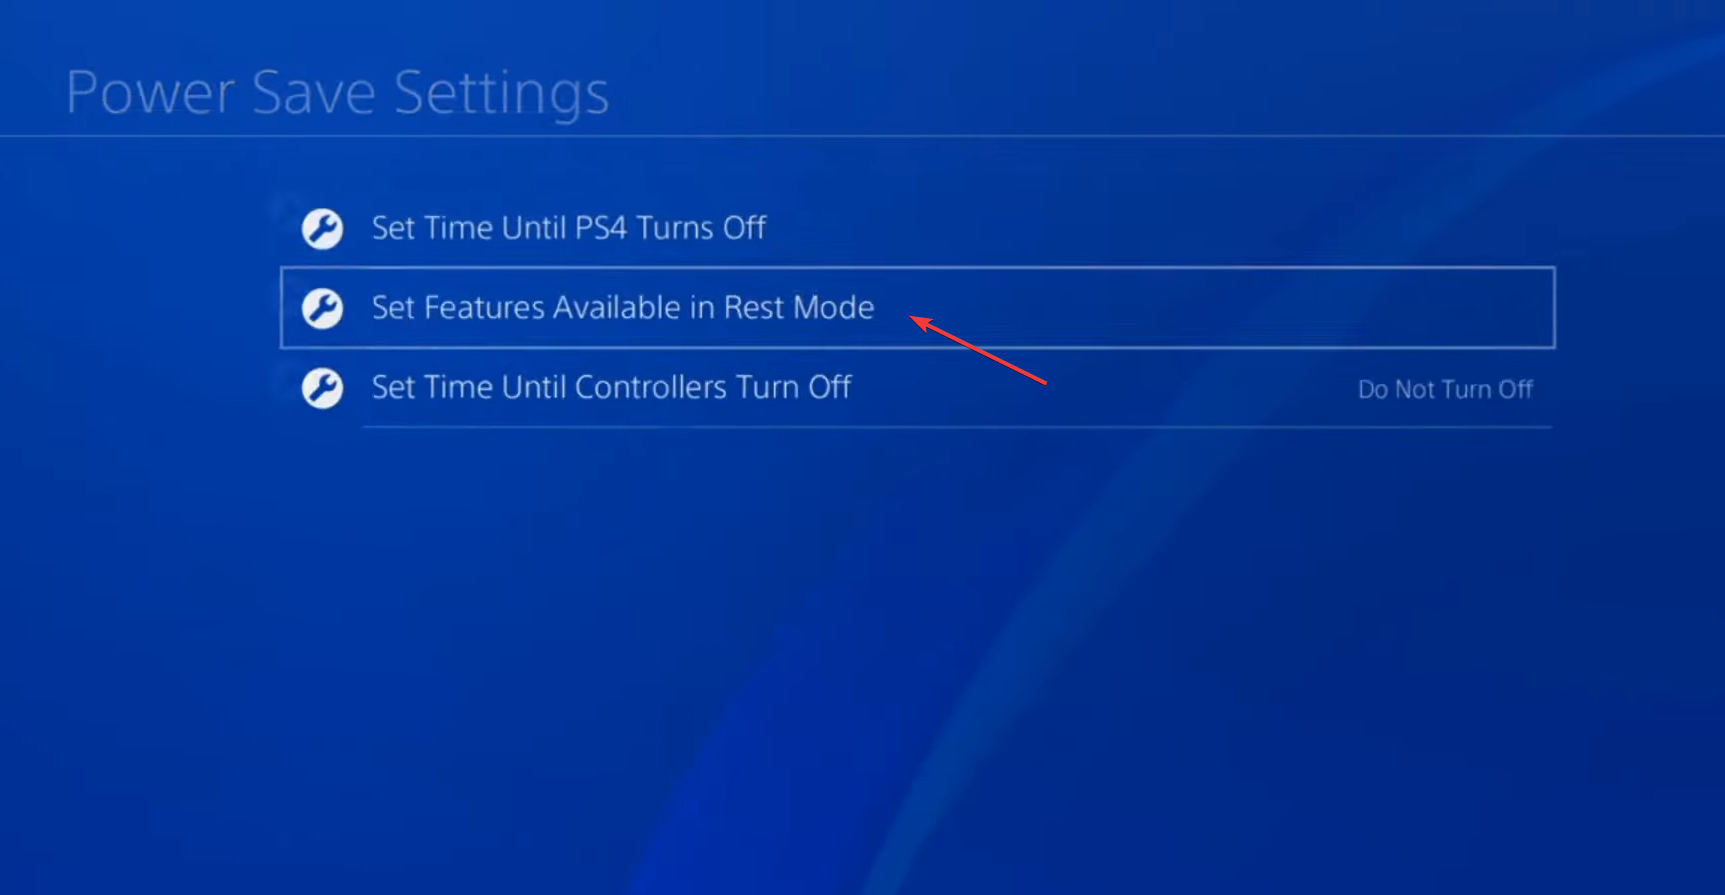 set features available in rest mode